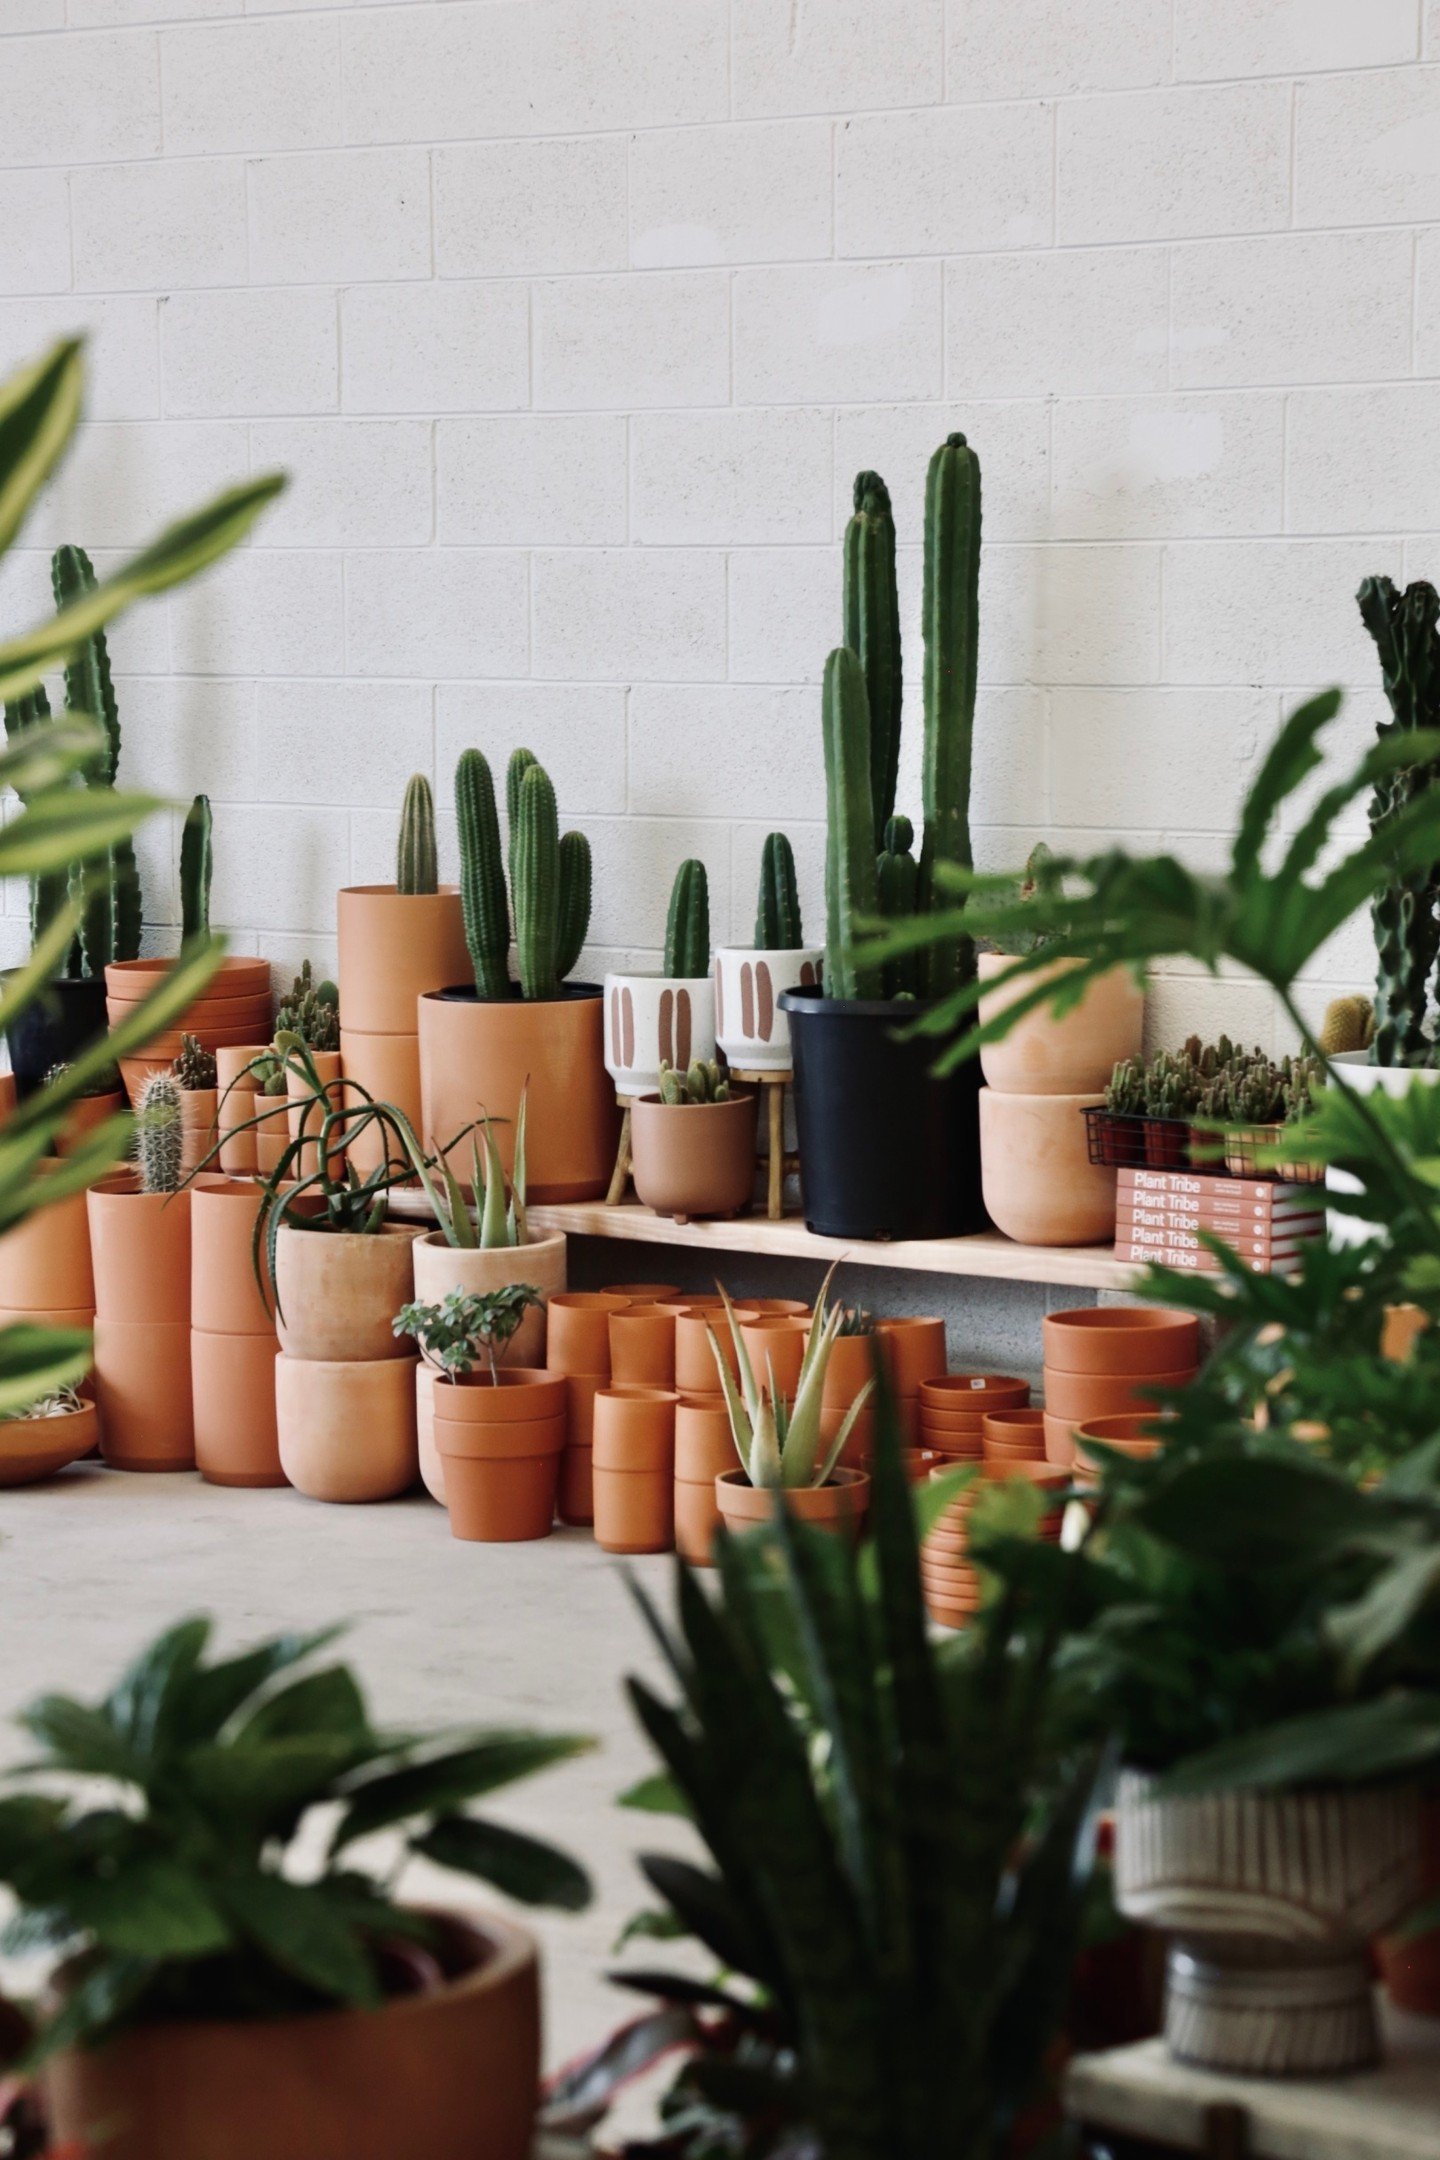 We have officially moved into our NEW location located at 749 Ten Mile Drive. We will be doing all of the same things with 10x more plants! Stop in to say hi and see the new, gorgeous space. 

📸:// @kkatiekelly

#coloradoflorist #coloradomountainflo